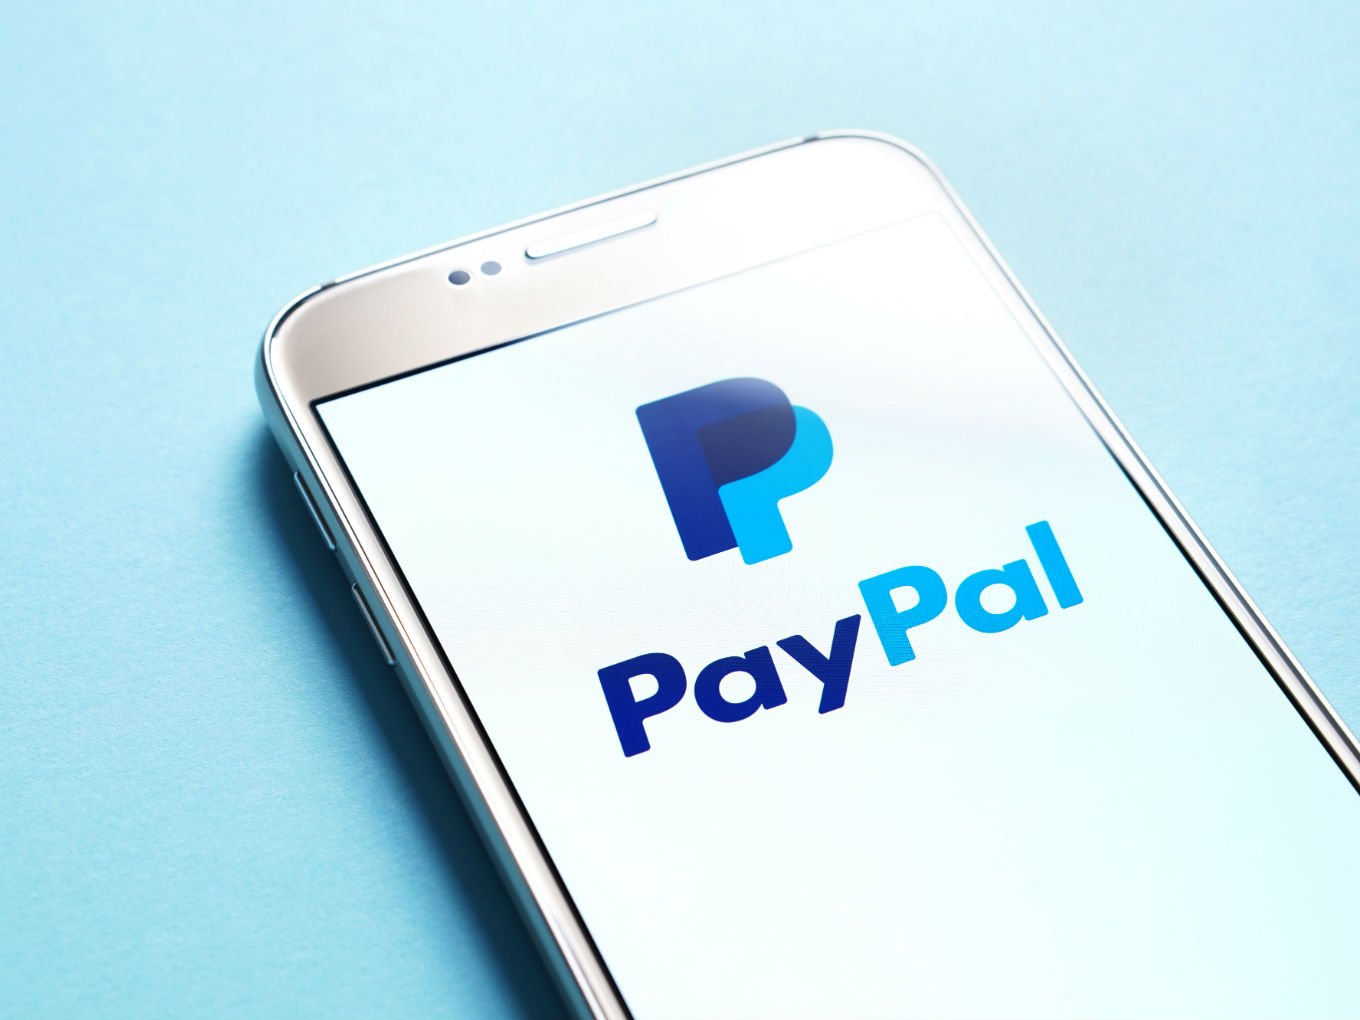 Paypal India Sees Losses Grow Faster Despite 1.5X Surge In Revenue